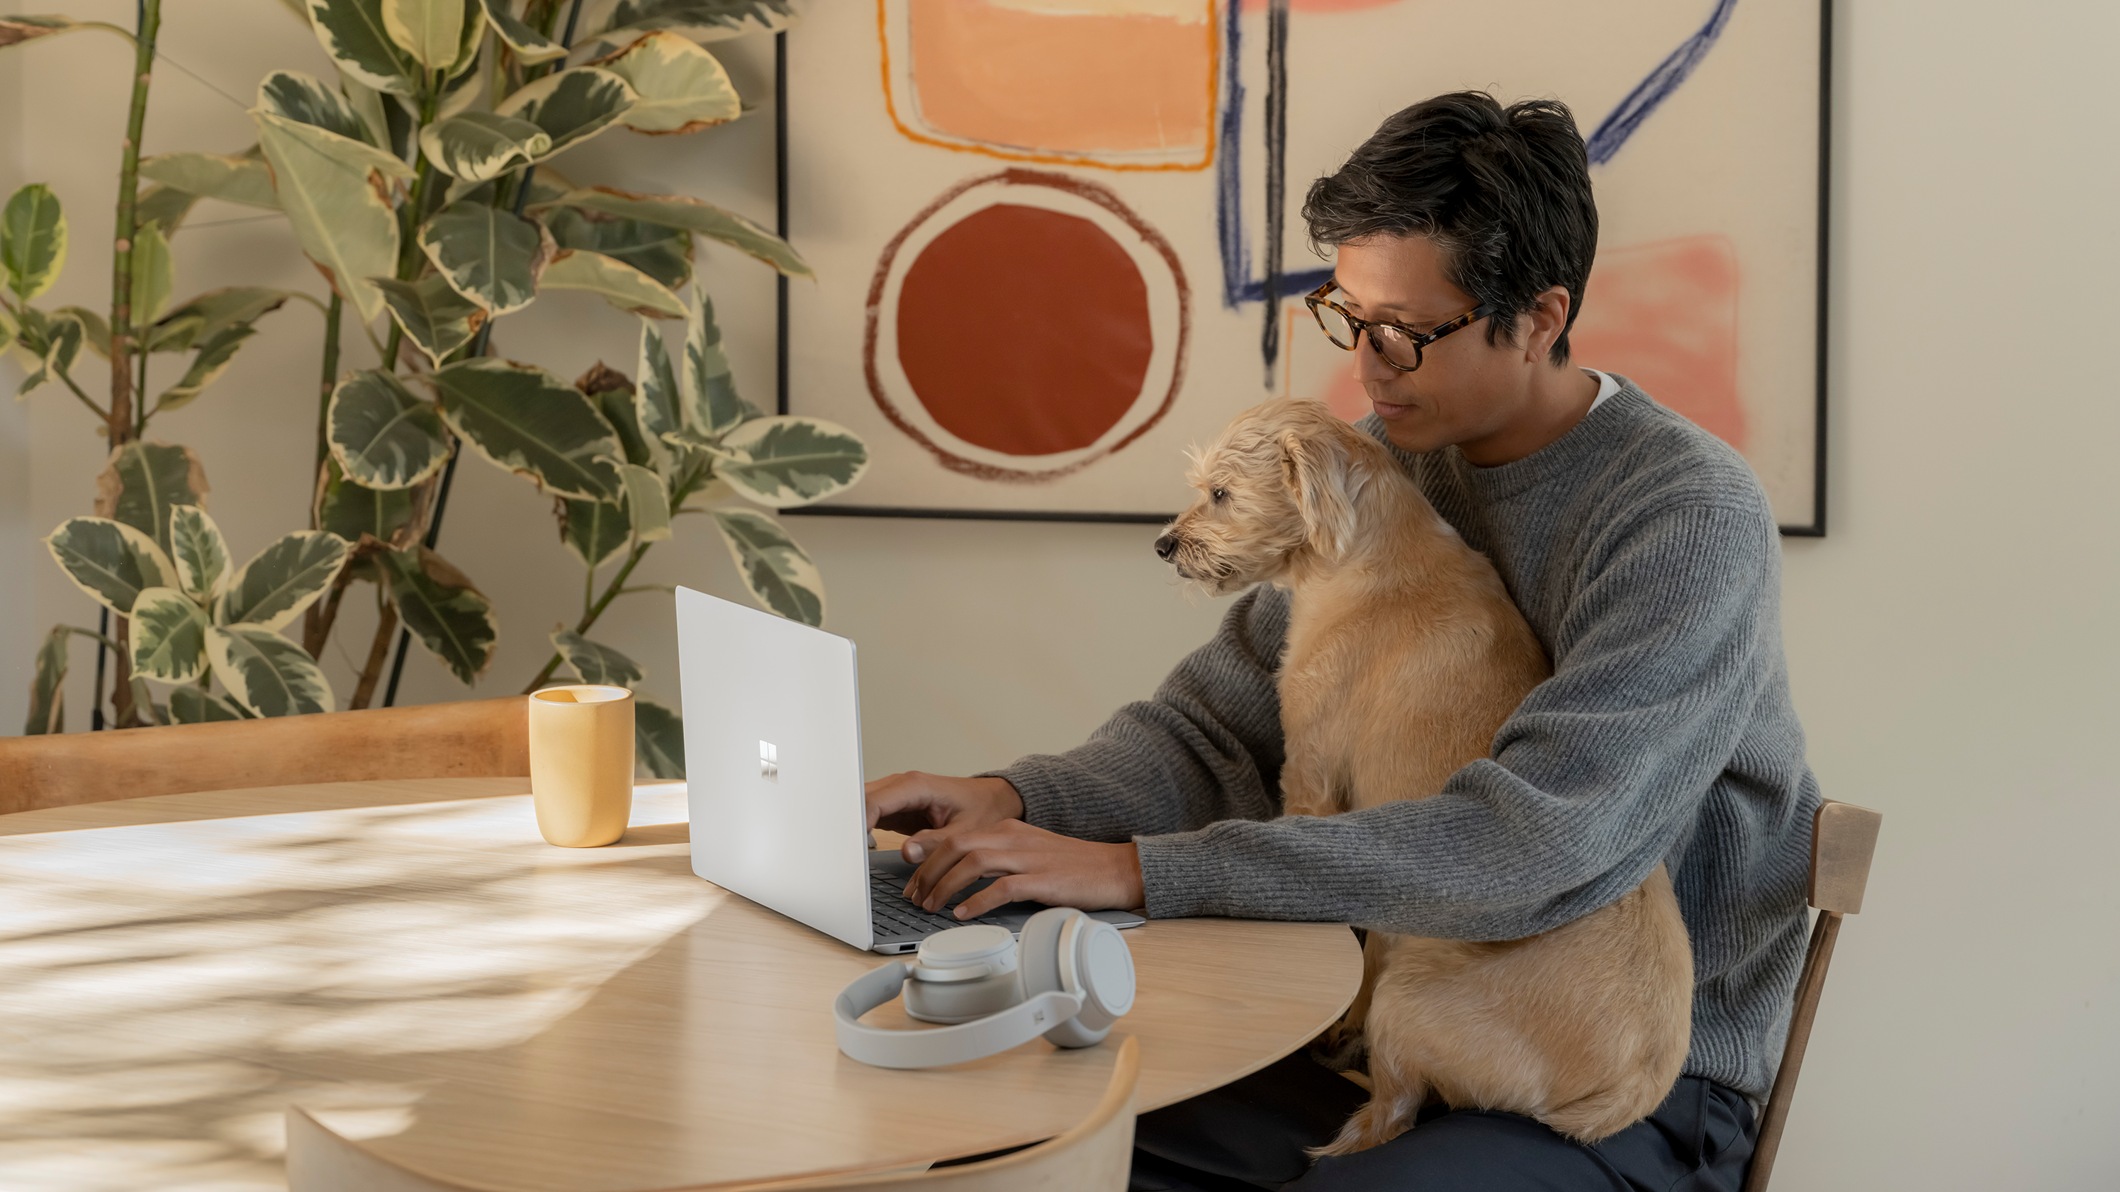 A man types on his laptop while working at home with his dog